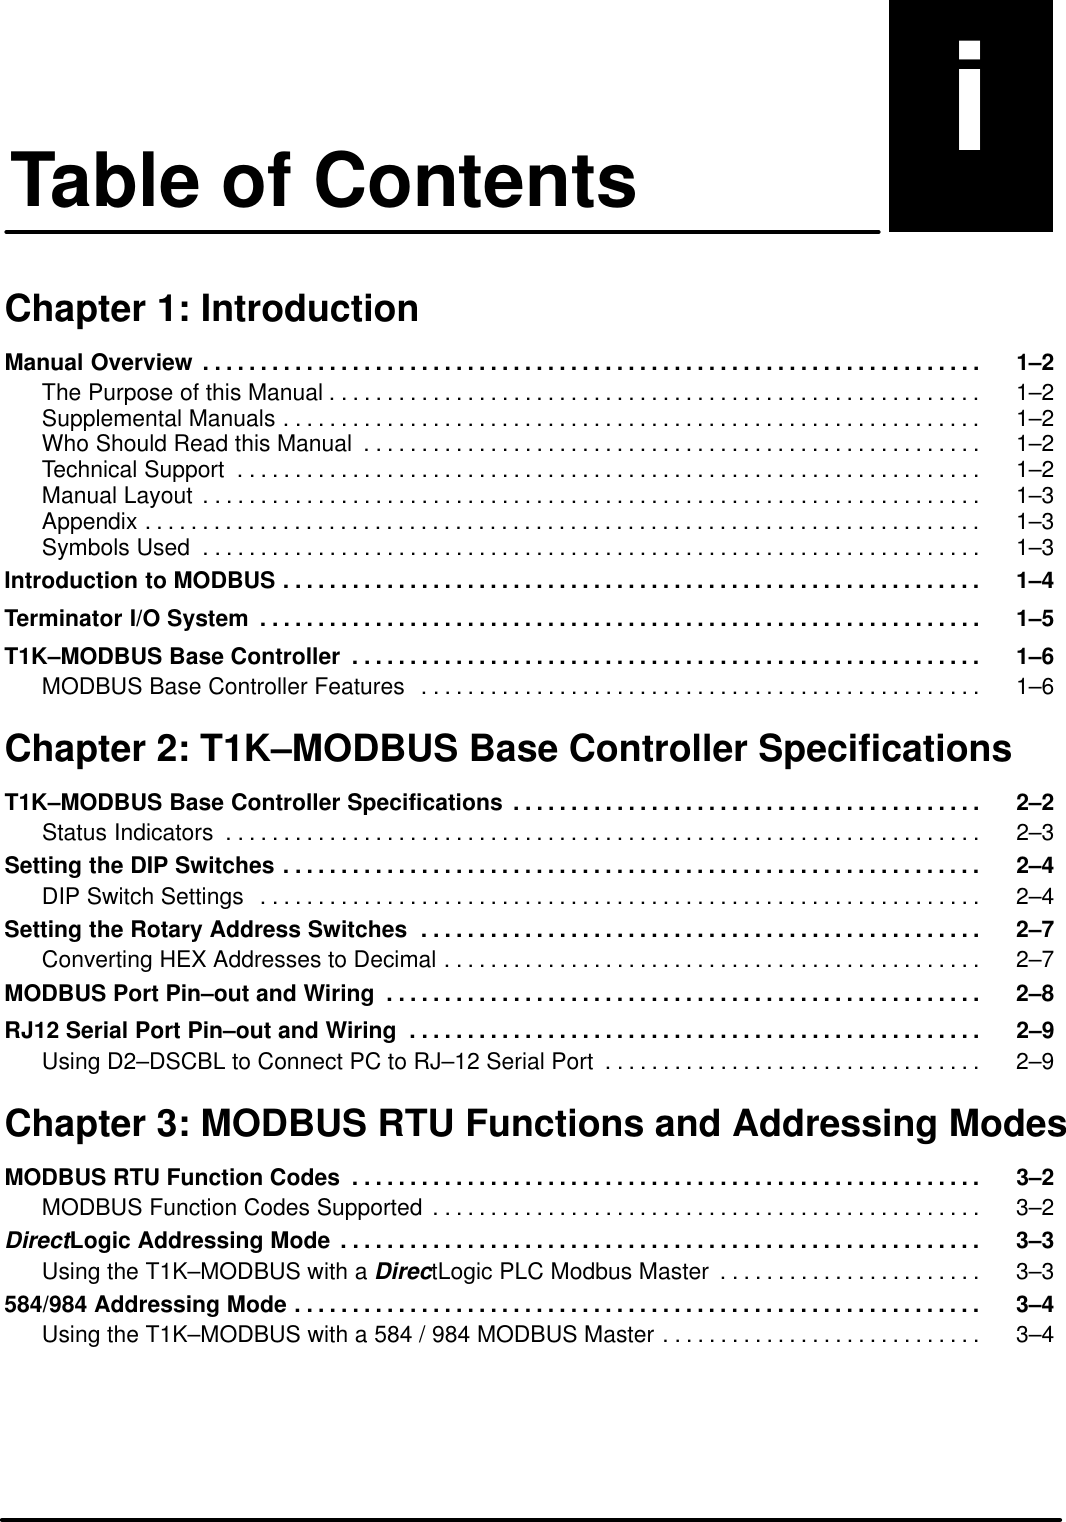 Page 1 of 2 - Table Of Contents